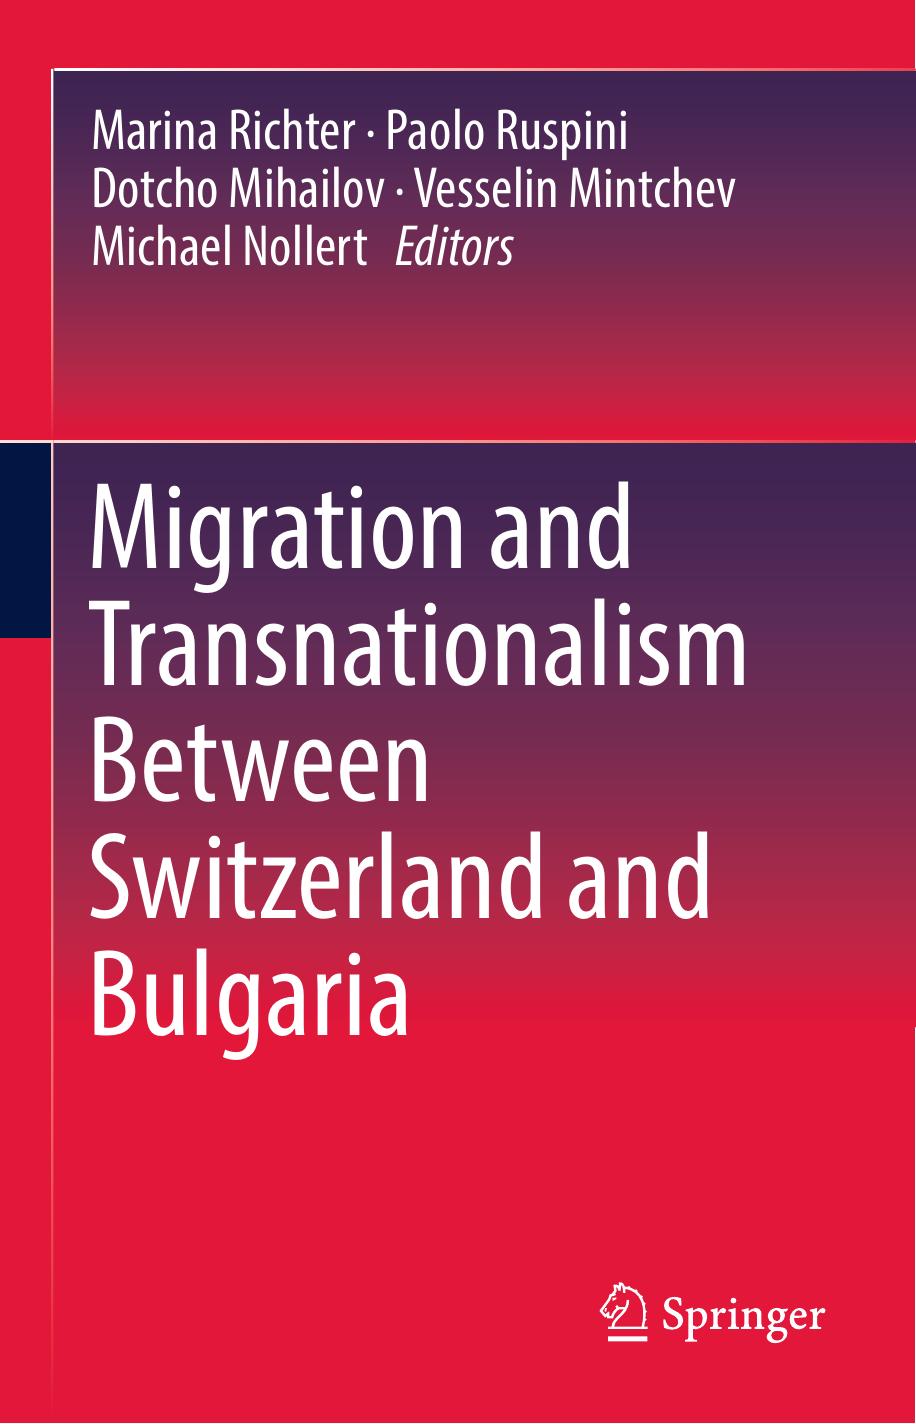 Migration and Transnationalism Between Switzerland and Bulgaria 2018